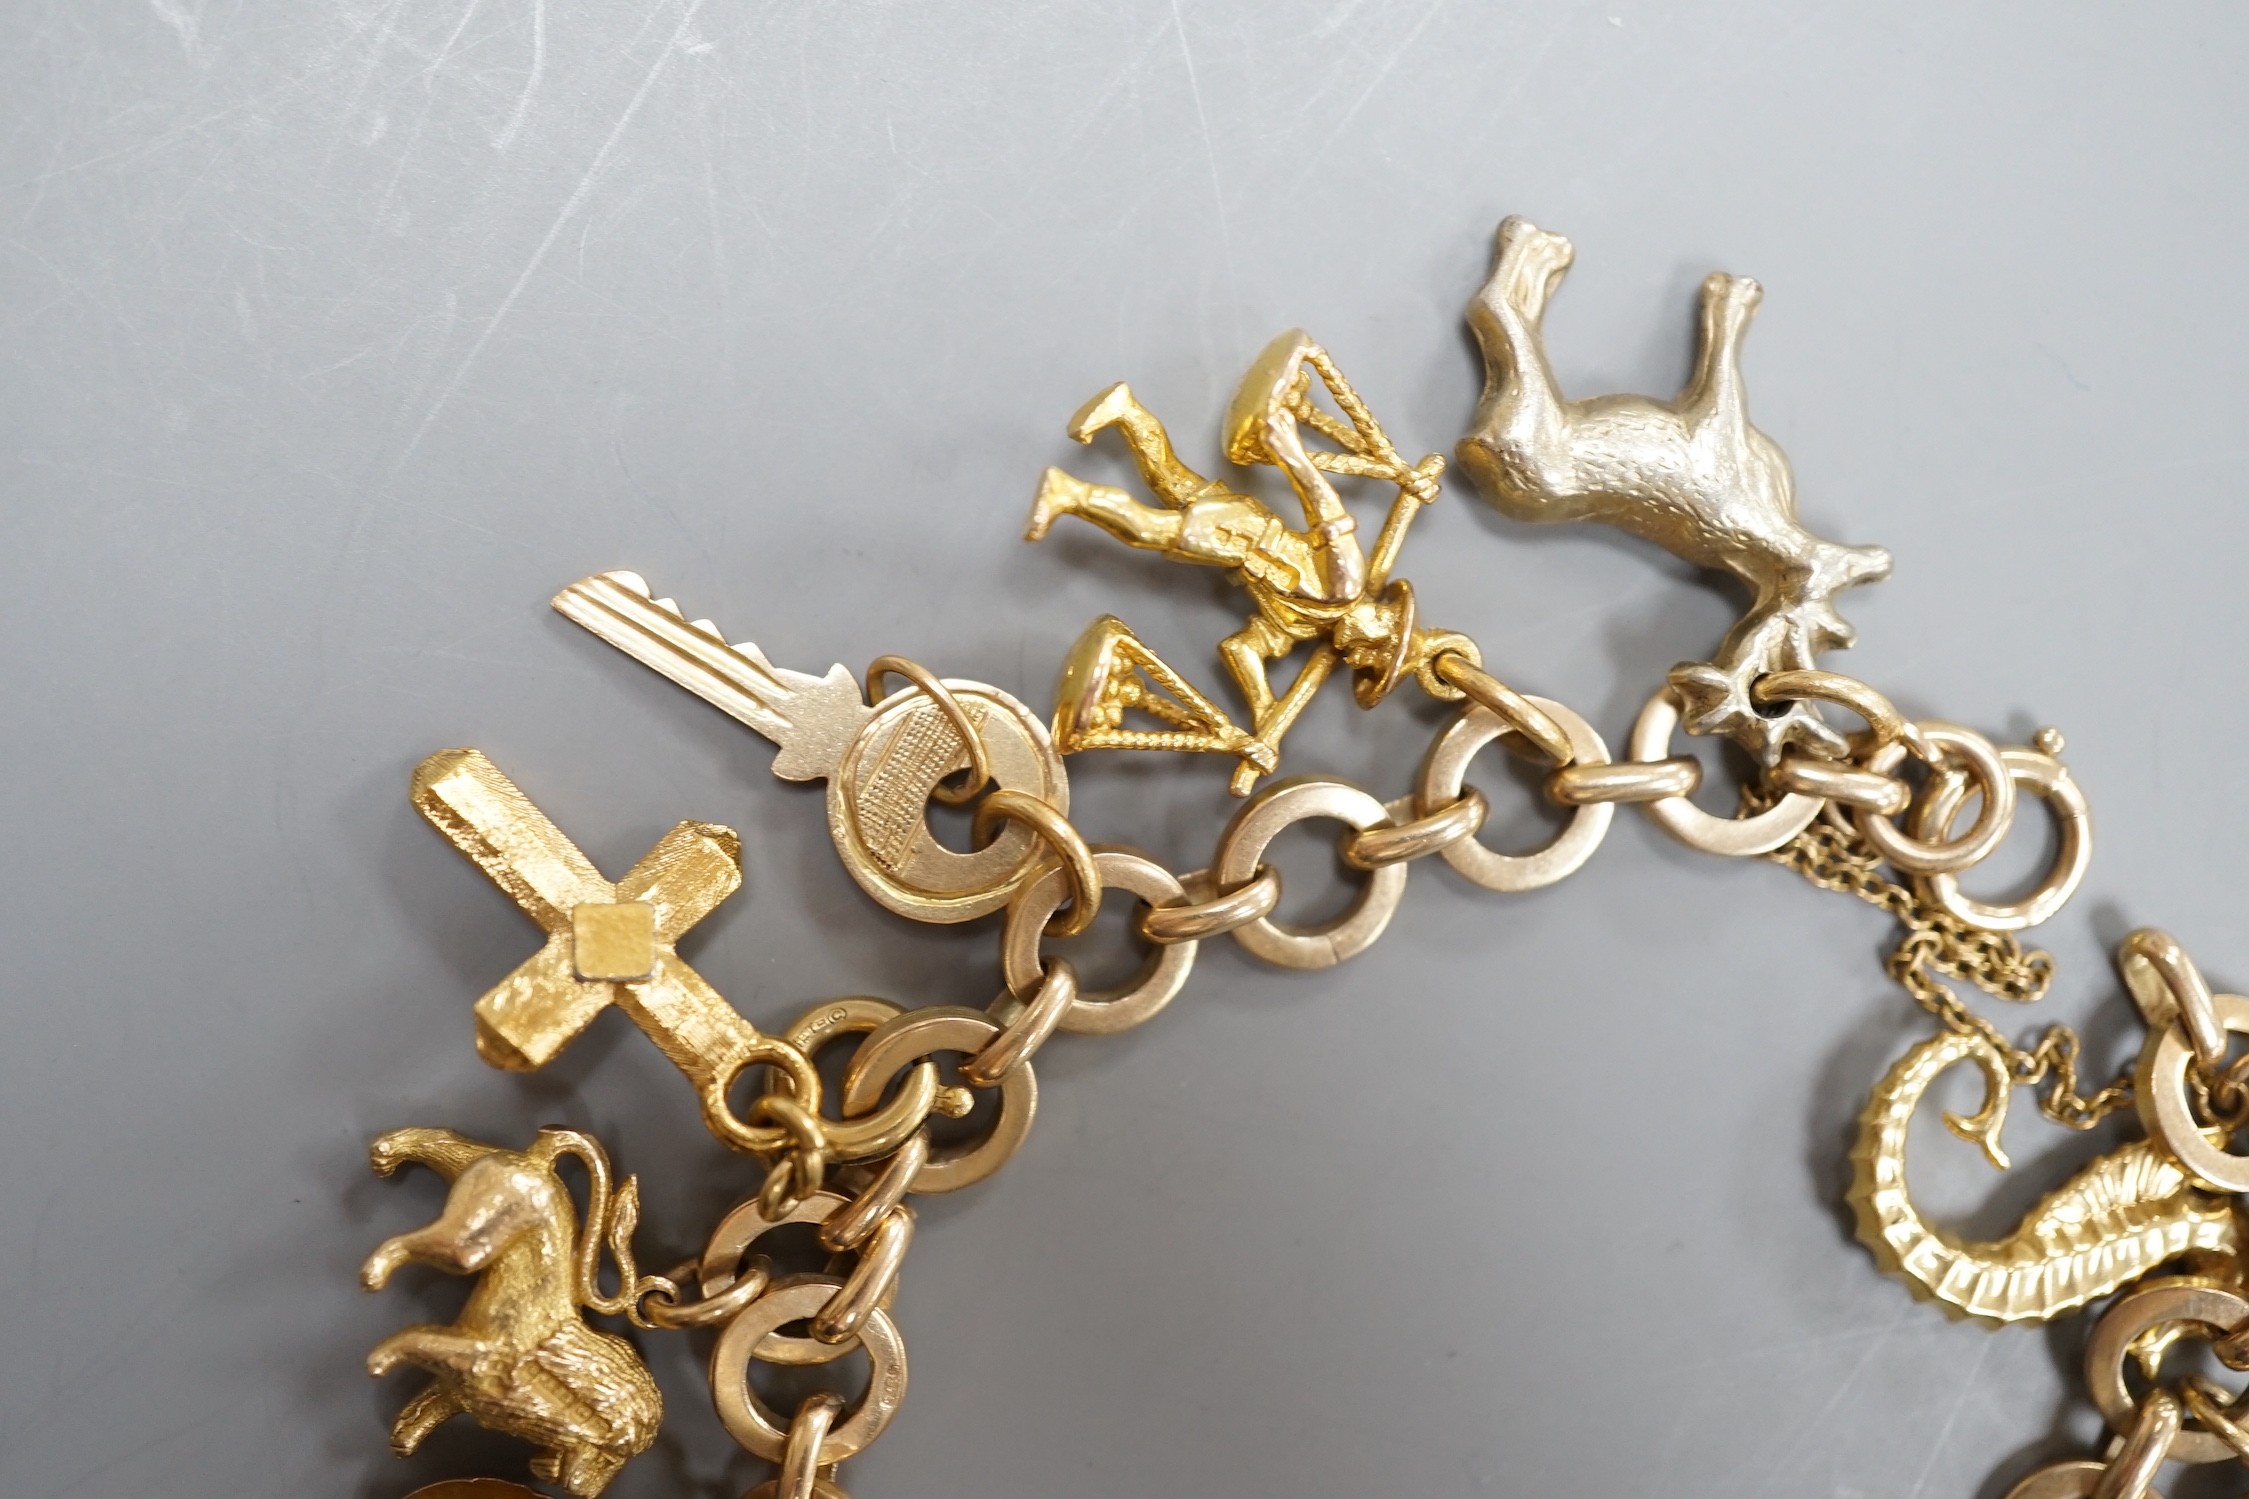 A 9ct gold charm bracelet, hung with assorted charm, including wagon, key, monkey etc. including six 9ct and one 18ct gold, gross weight 33.6 grams.